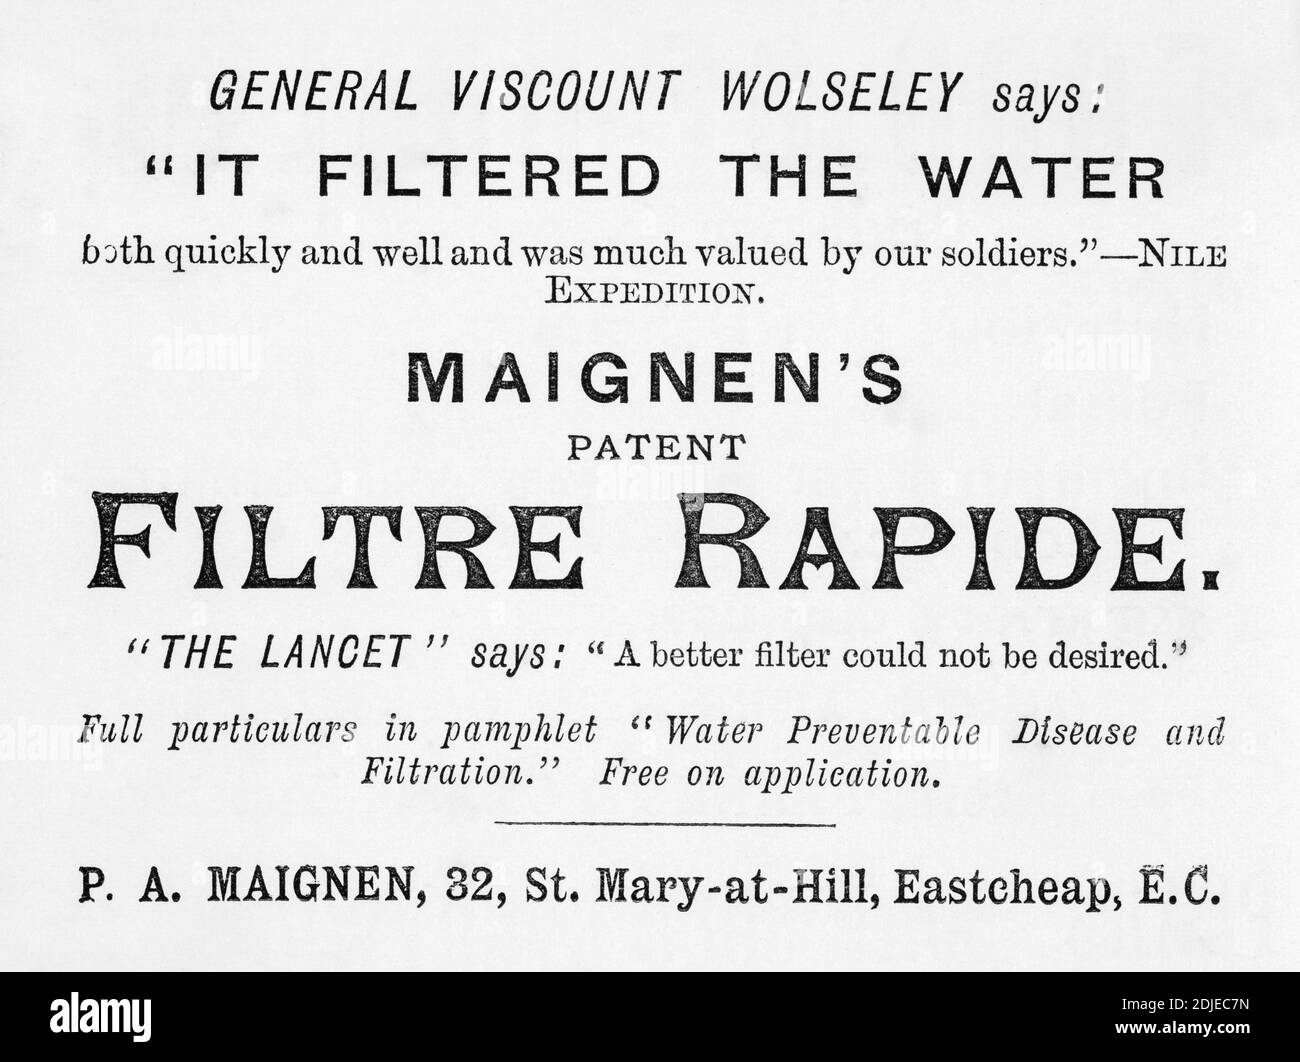 1886 Victorian advert promoting a water filtration system, as used on expeditions. Insight into water quality in domestic households in old times. Stock Photo